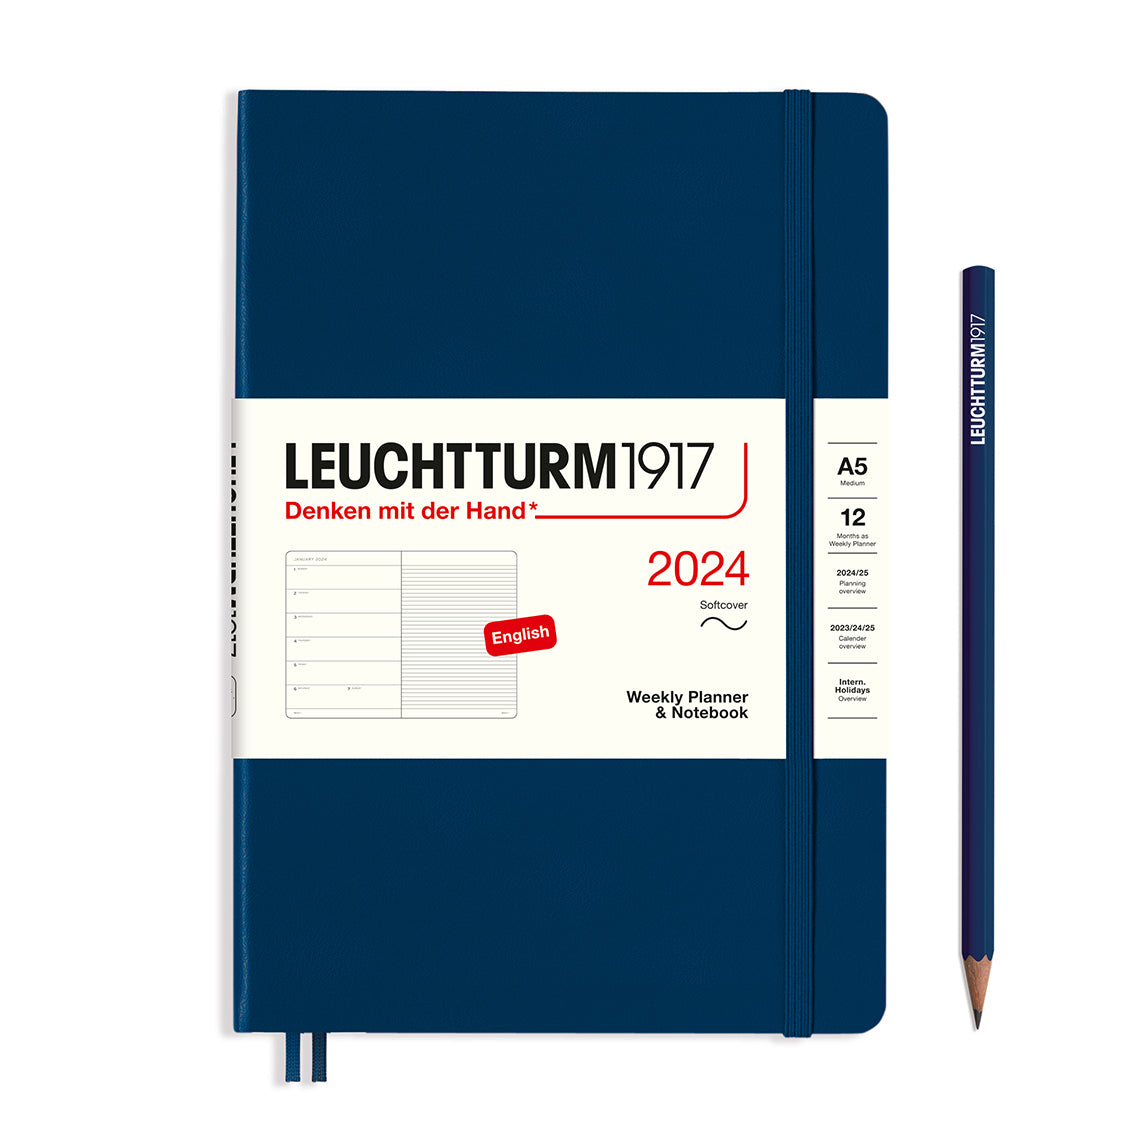 An image of a navy planner with a navy elastic band holding it together and a cream paper wrap around the middle stating the business name Leuchtturm1917, that it is for the year 2024, it is a weekly planner and notebook, is A5 in size and an English language version. It has an image on the wrap showing the inside layout which is a week on the left hand page and a notes page on thr right hand page. A navy pencil is shown at the side of the planner.